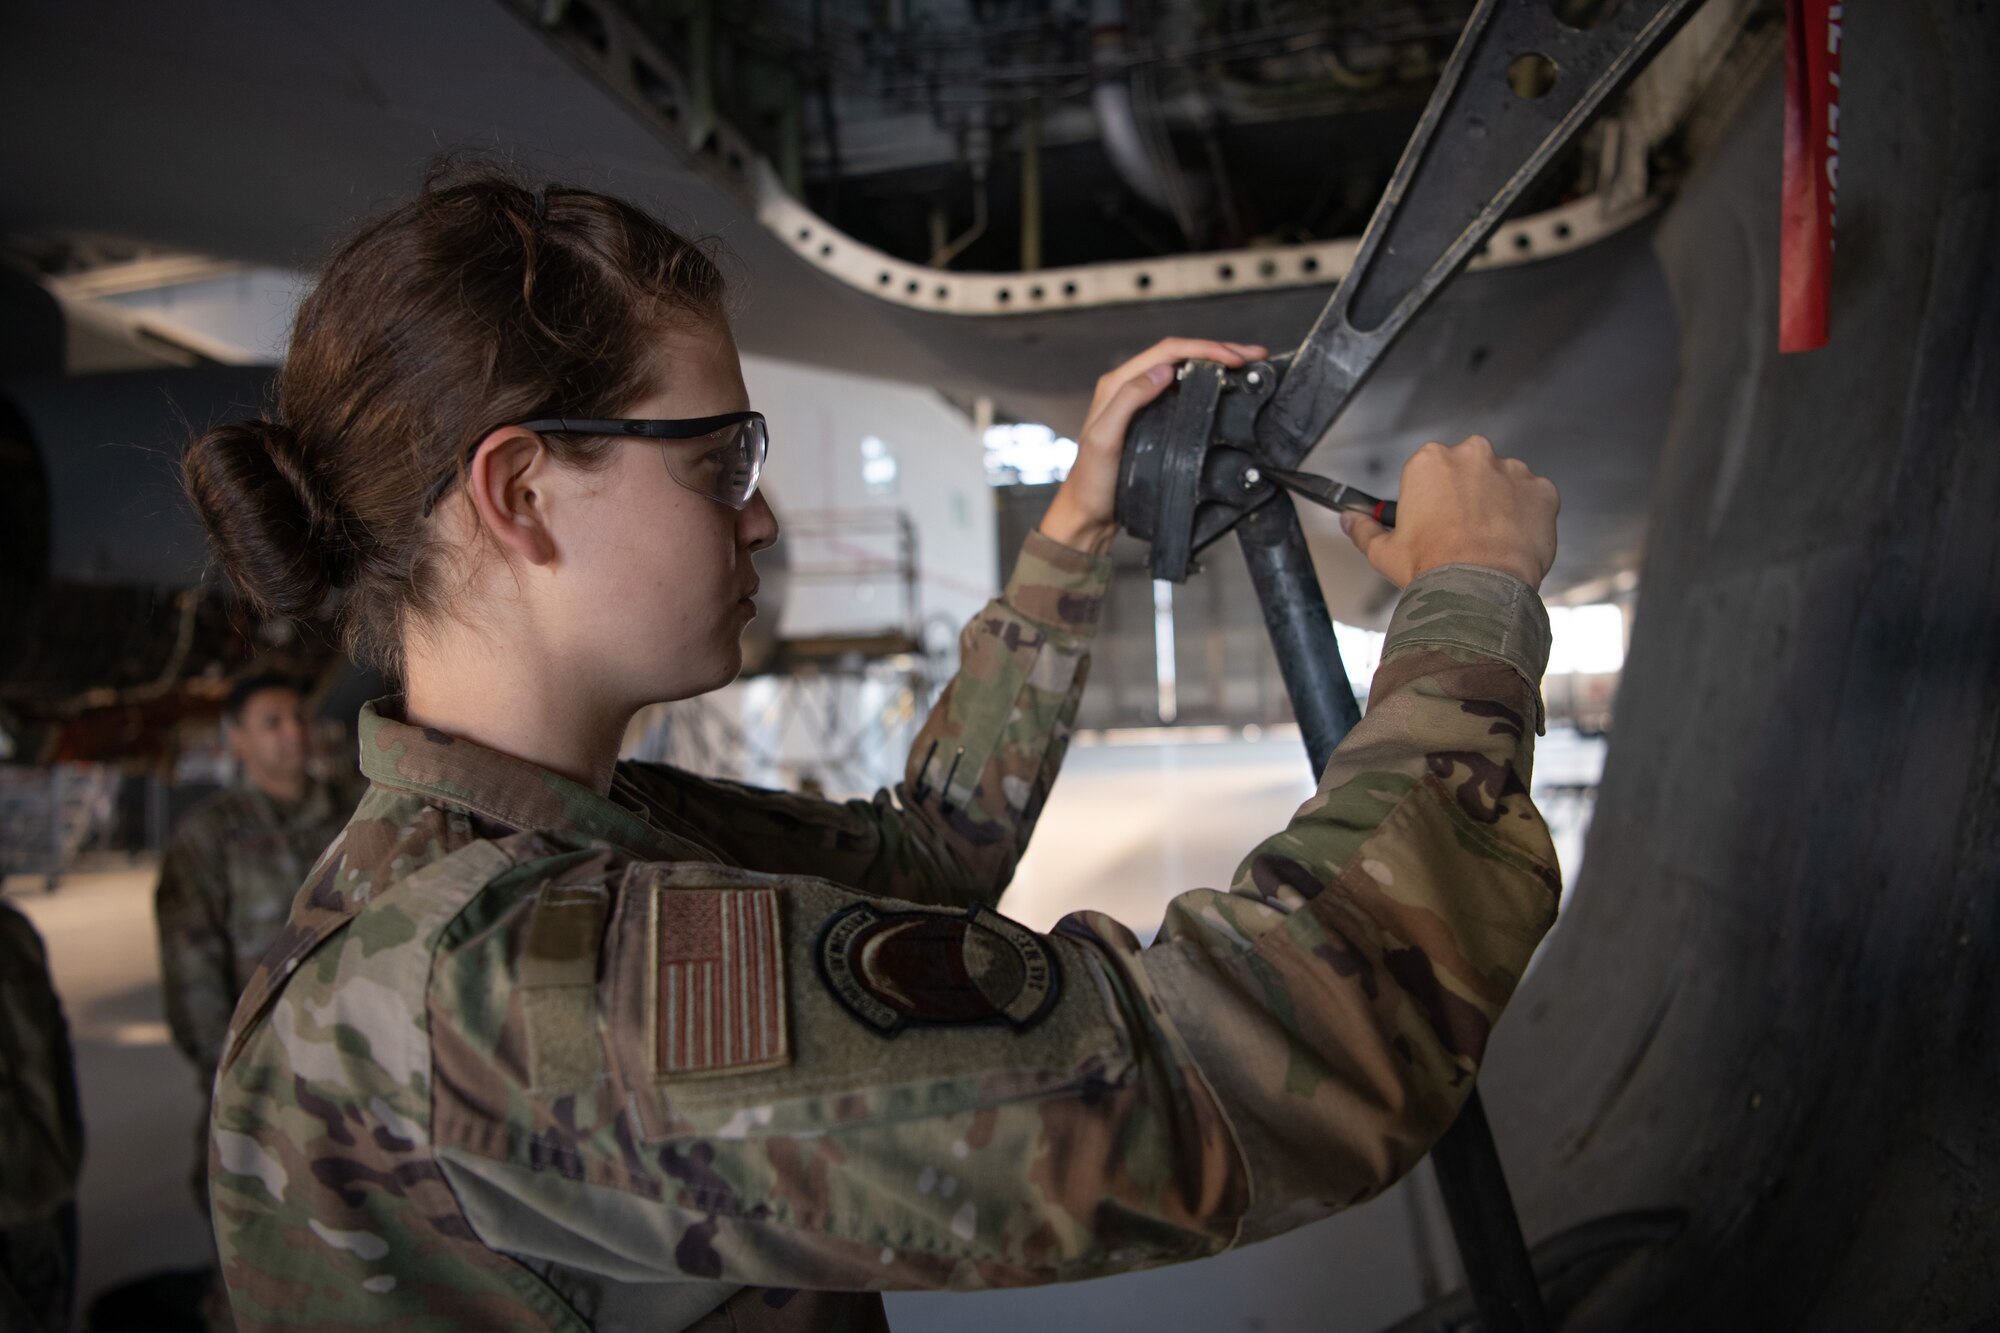 Senior Airman Ashley Walsh helps to keep 349th Air Mobility Wing ready to fly